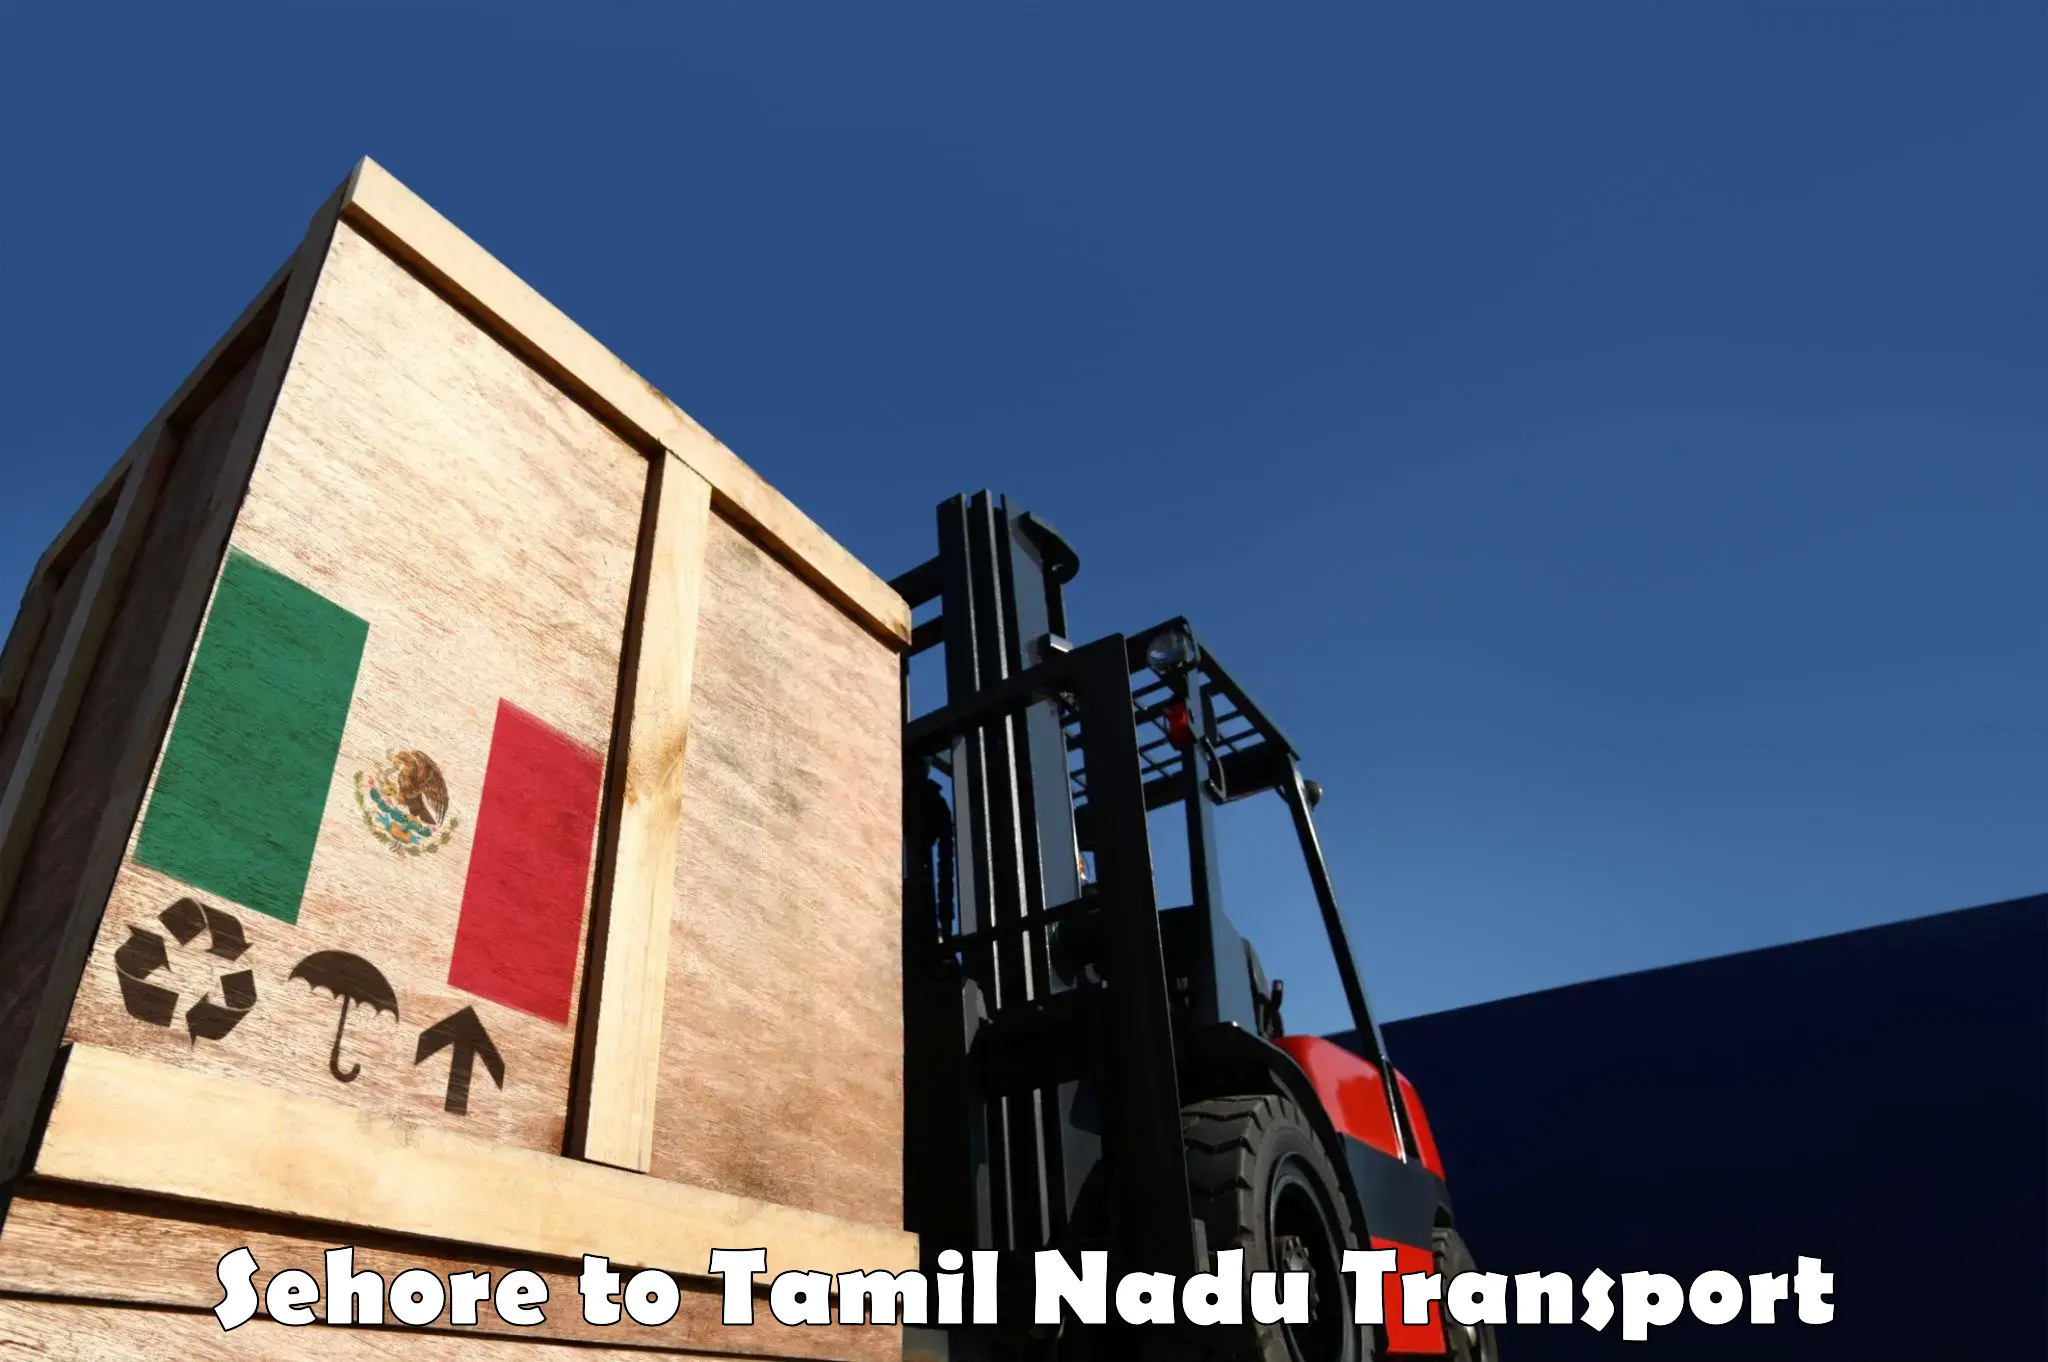 Goods delivery service Sehore to Thoothukudi